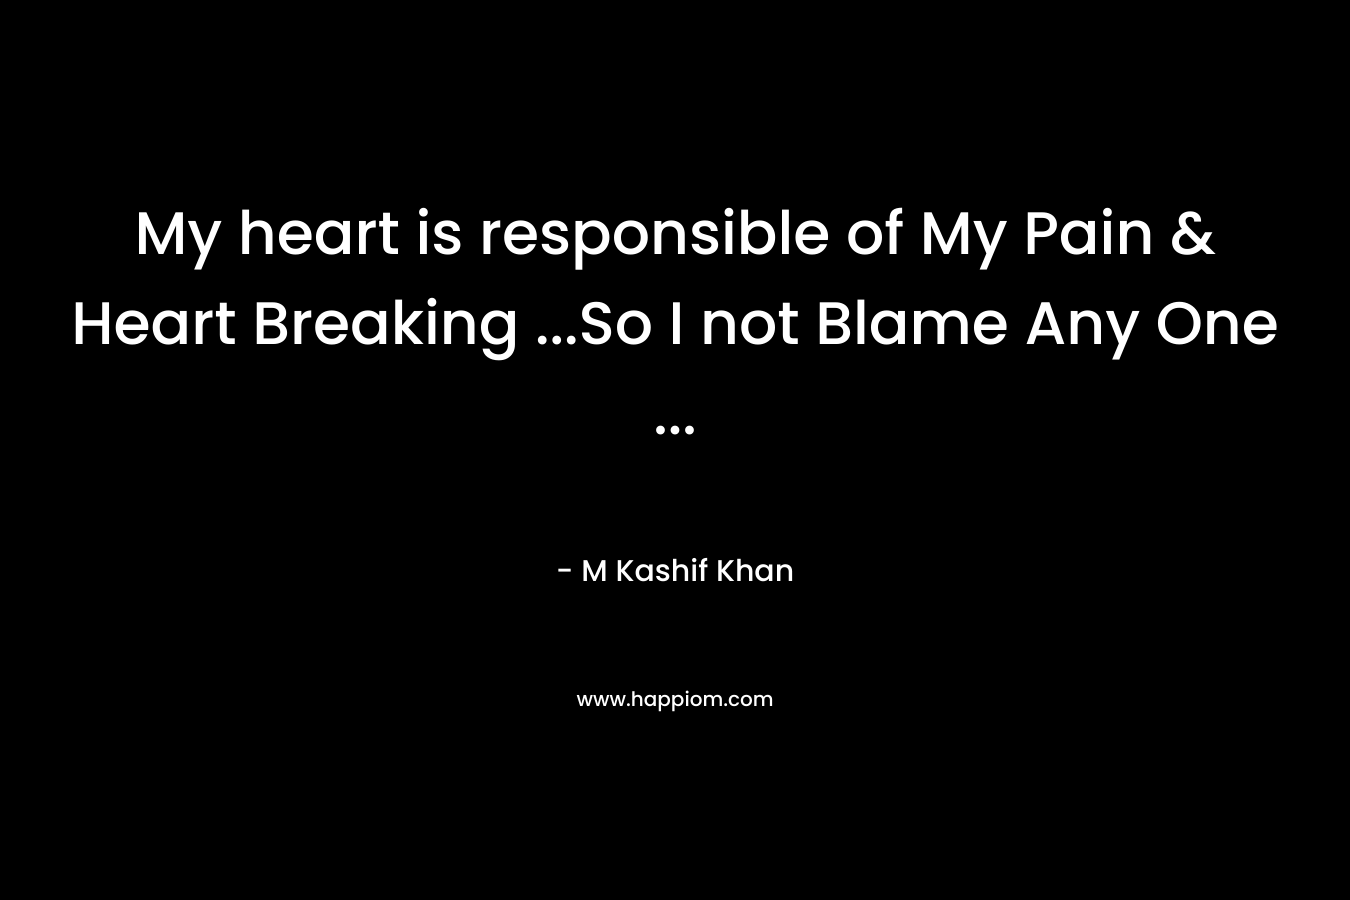 My heart is responsible of My Pain & Heart Breaking ...So I not Blame Any One ...